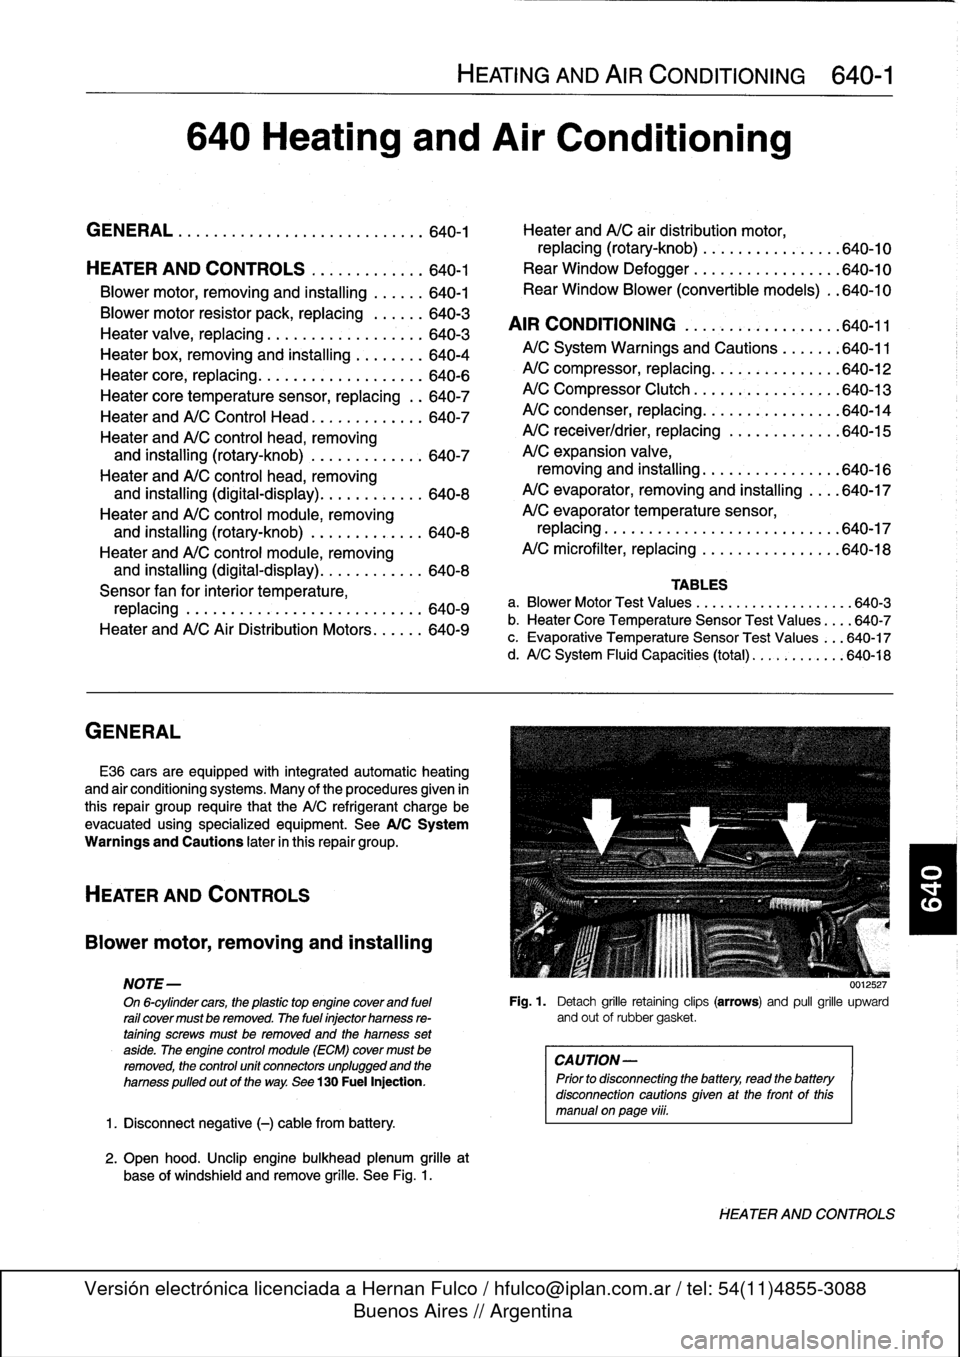 BMW 328i 1995 E36 User Guide 
GENERAL

E36
cars
are
equipped
with
integrated
automatic
heating

and
air
conditioning
systems
.
Many
of
the
procedures
given
in

this
repair
group
require
that
the
A/C
refrigerant
charge
be

evacuat